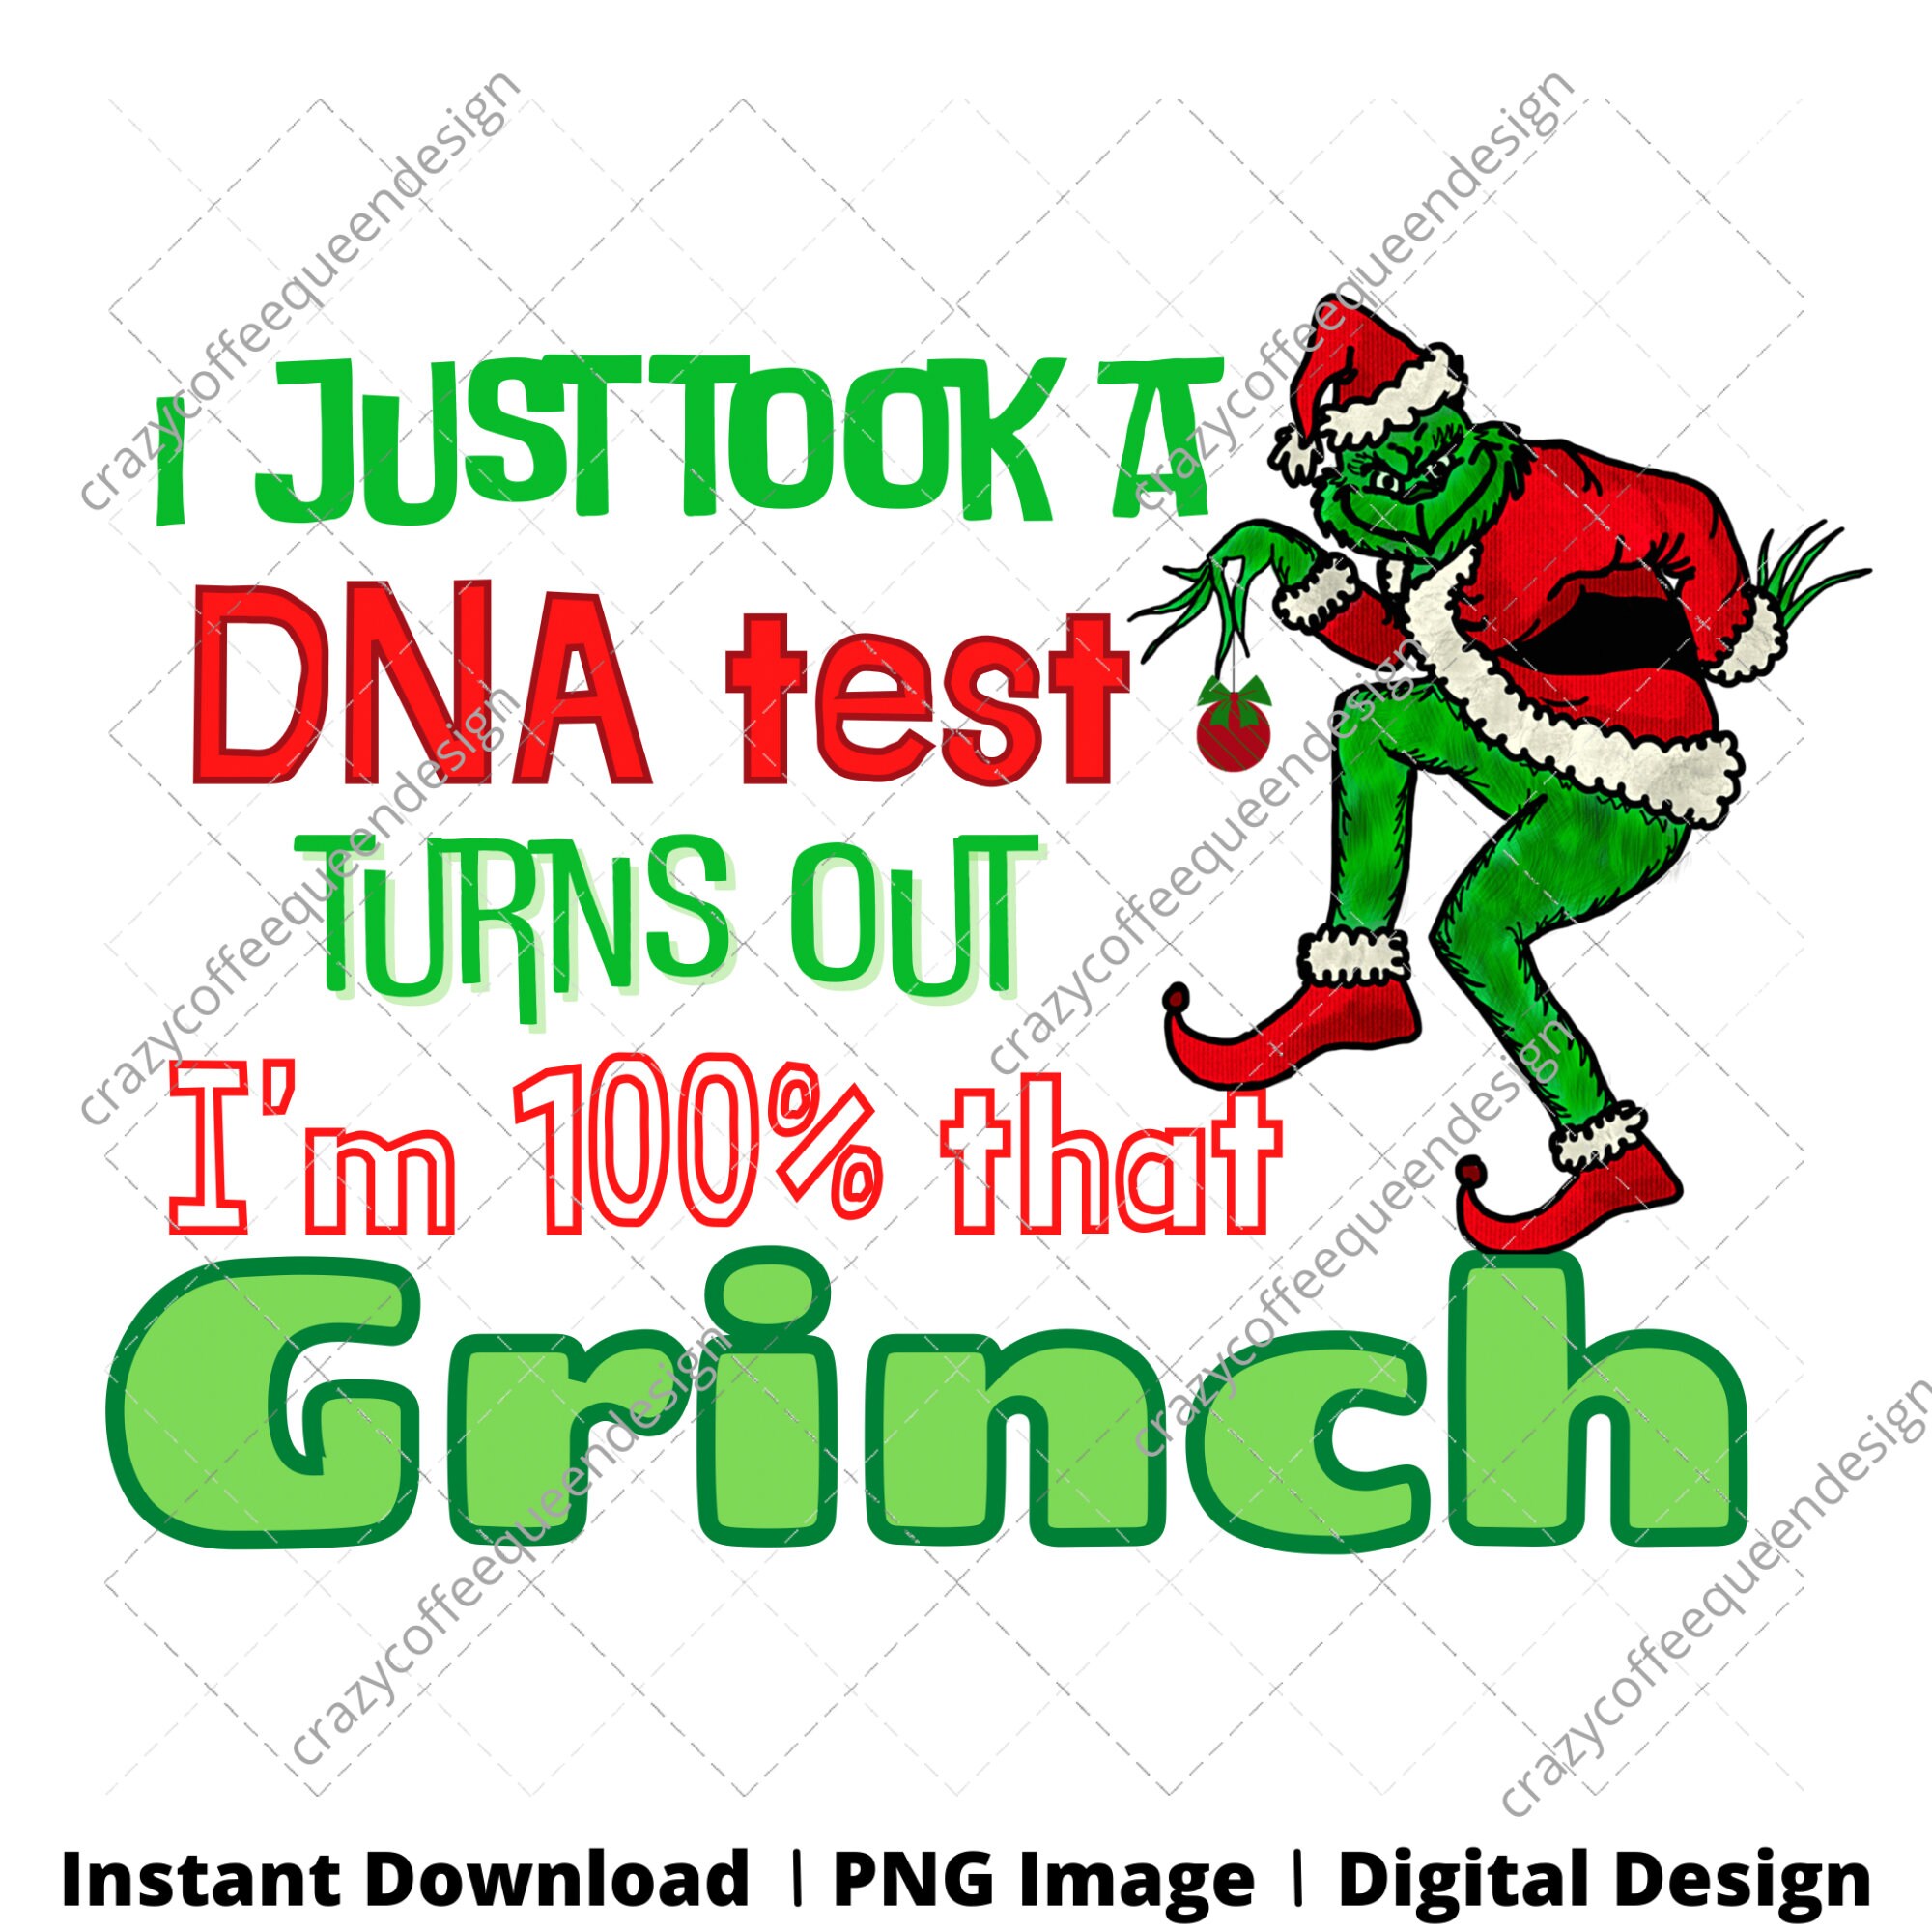 grinch-idi3d_ (i guess) on X: After being locked out of this